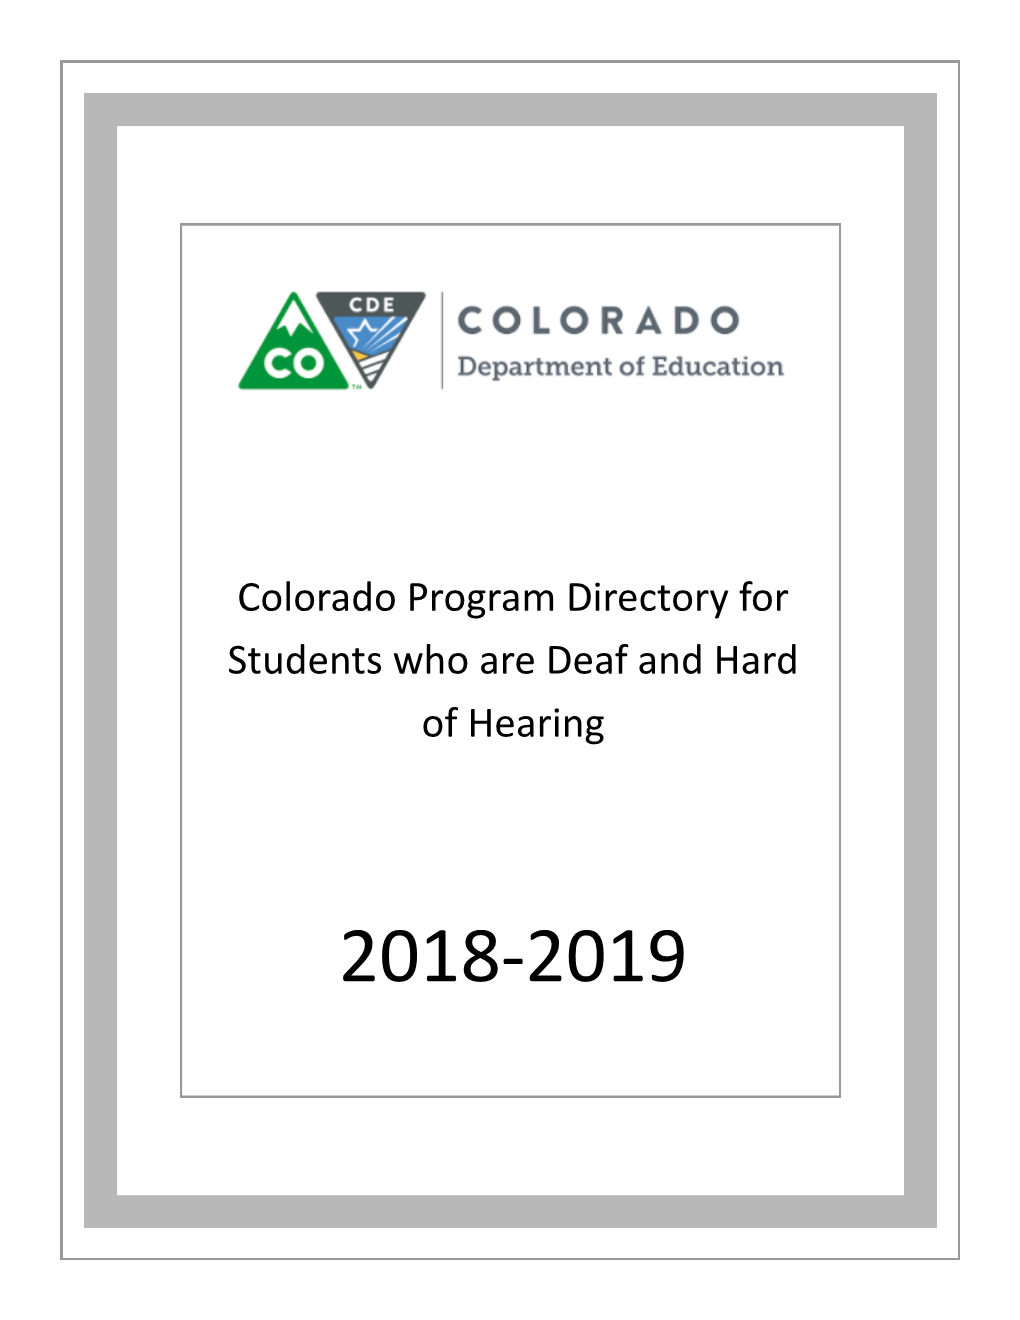 Colorado Program Directory for Students Who Are Deaf and Hard of Hearing